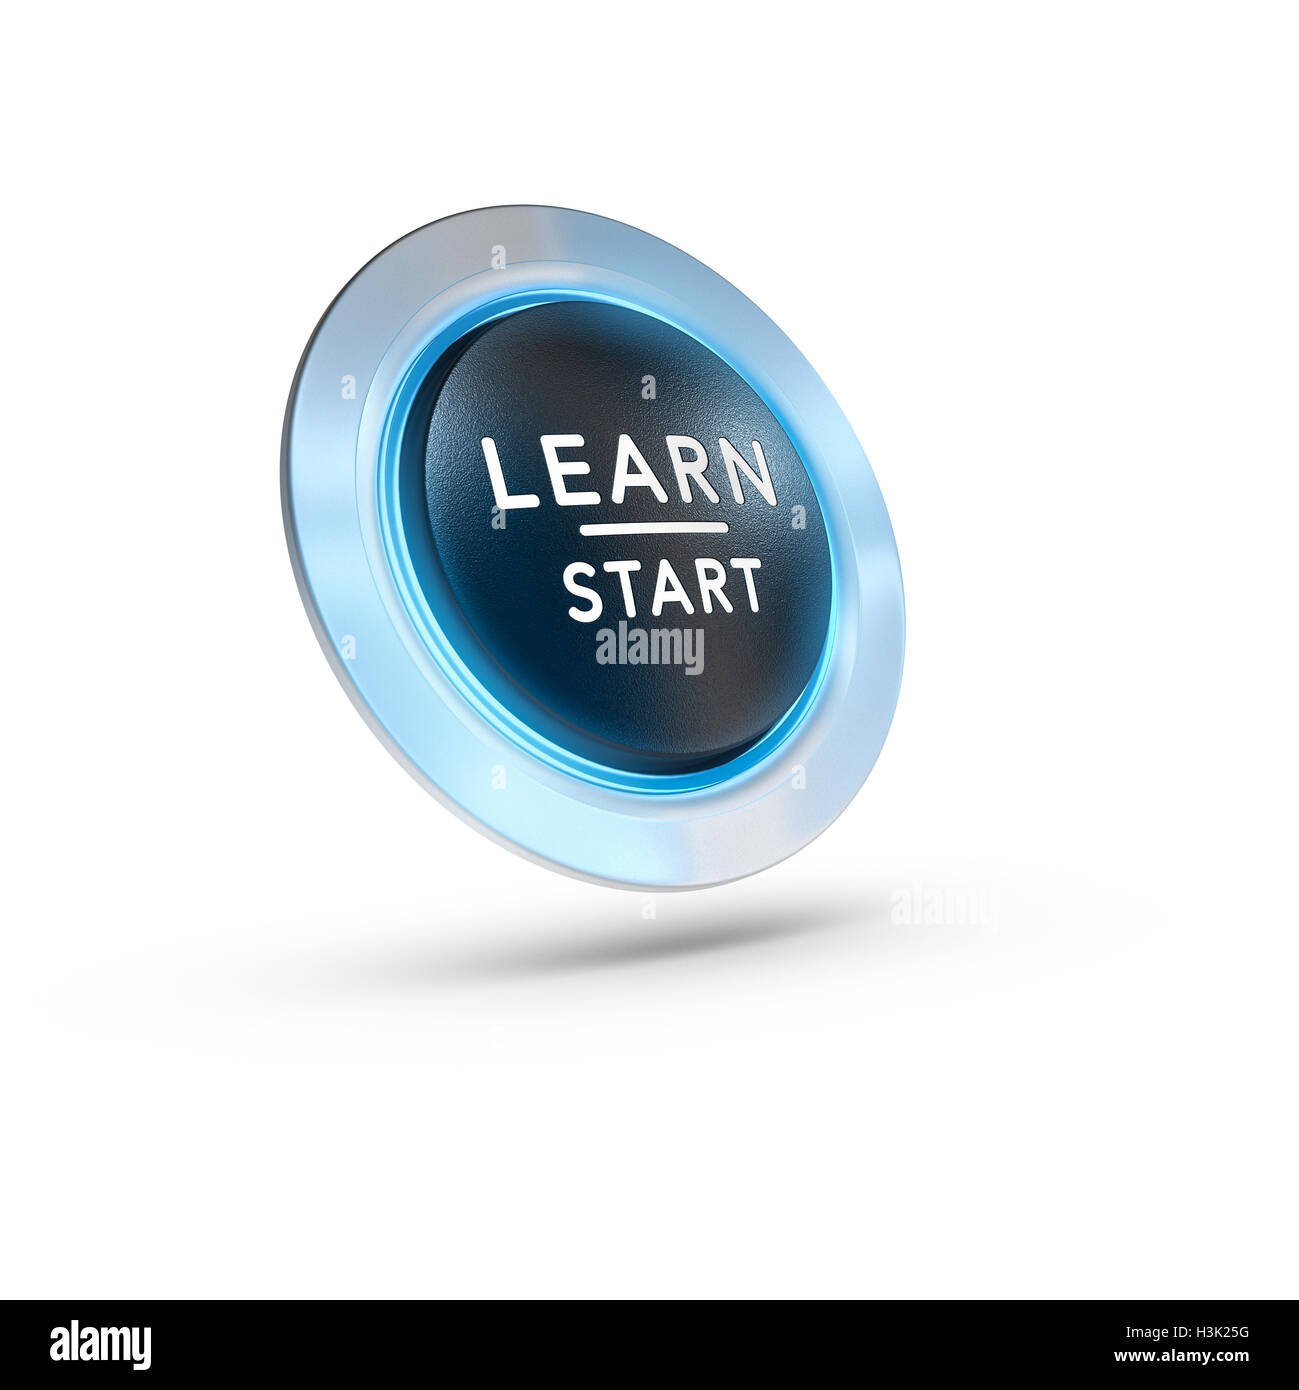 3D illustration of a button with the text learn start over white background. Concept image Stock Photo